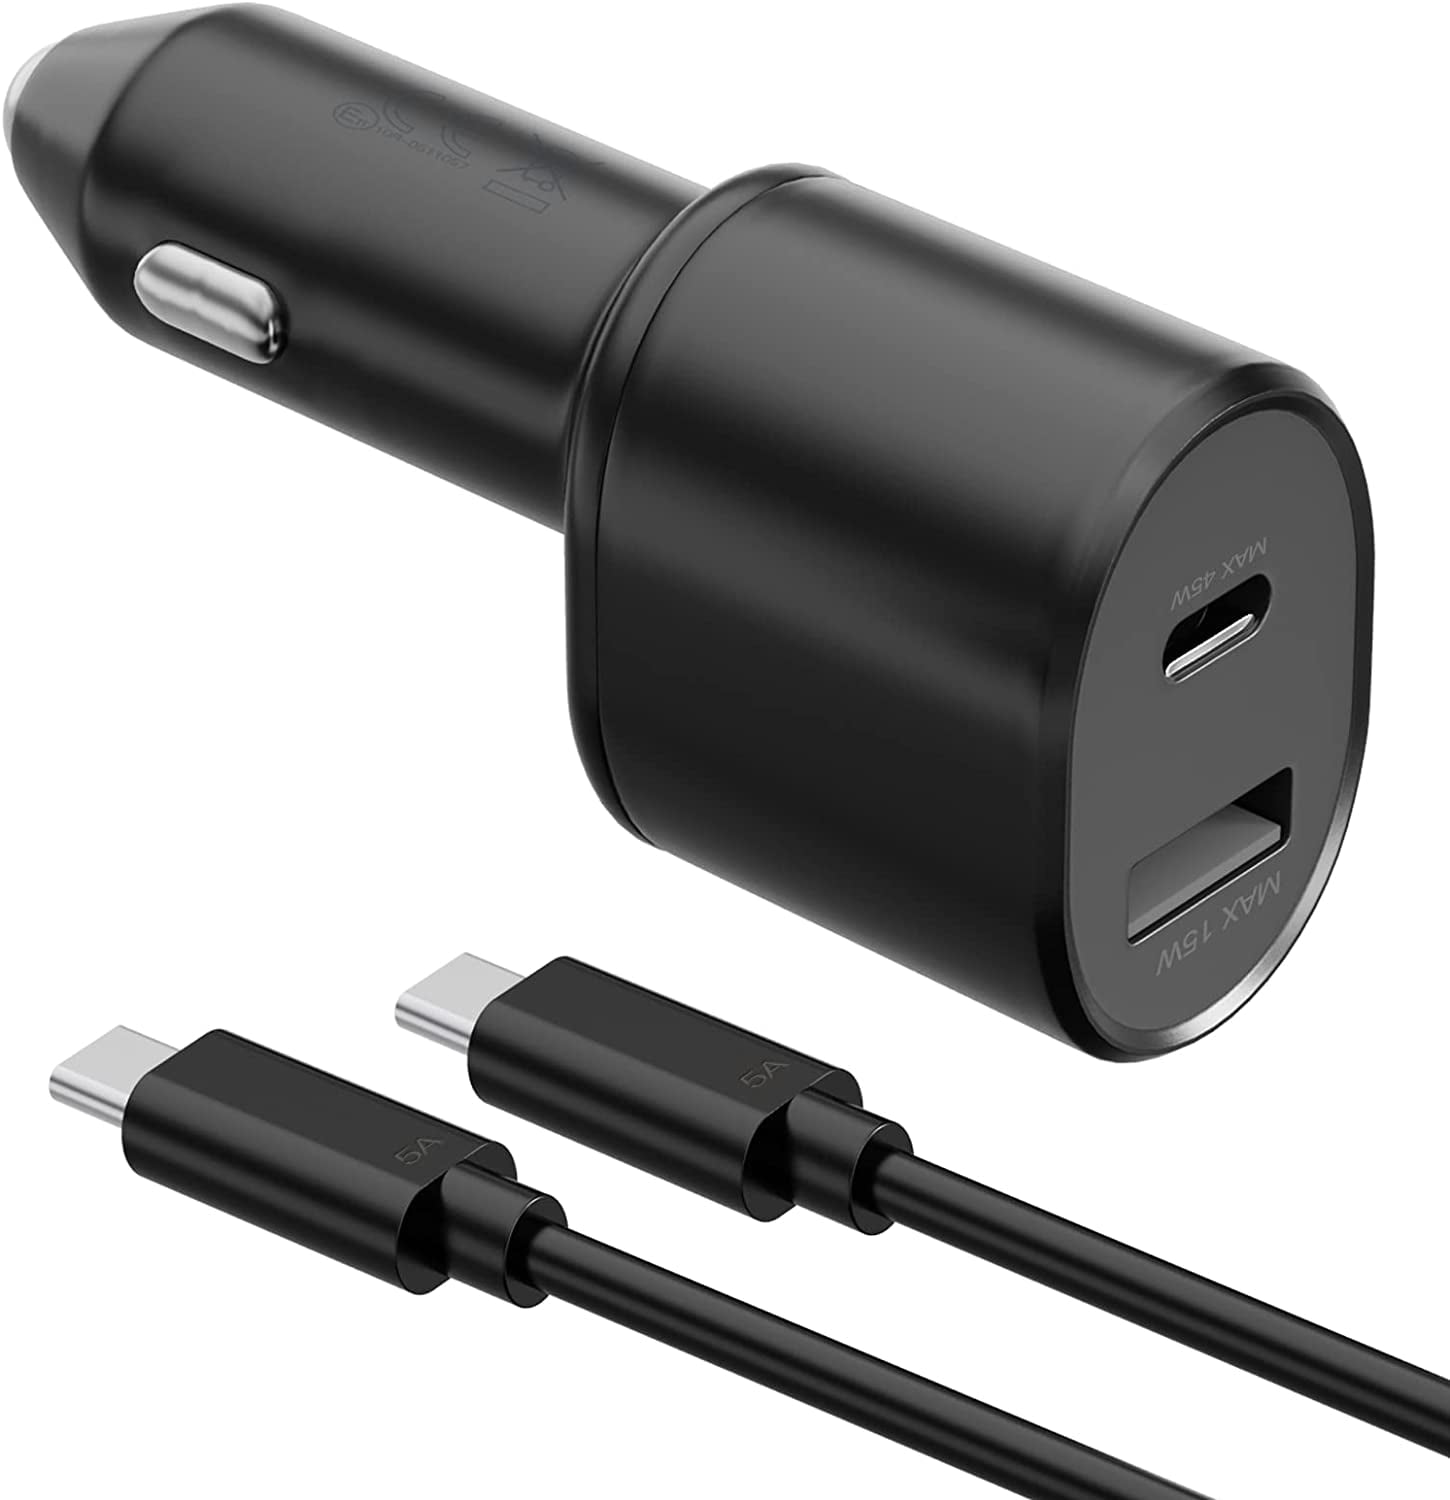  SUNDAREE Car Charger with Plug Outlet, 51W USB Car Charger Fast  Charging, PD PPS QC 3.0 USB Cigarette Lighter Charger for iPhone and  Samsung and More - Black : Cell Phones